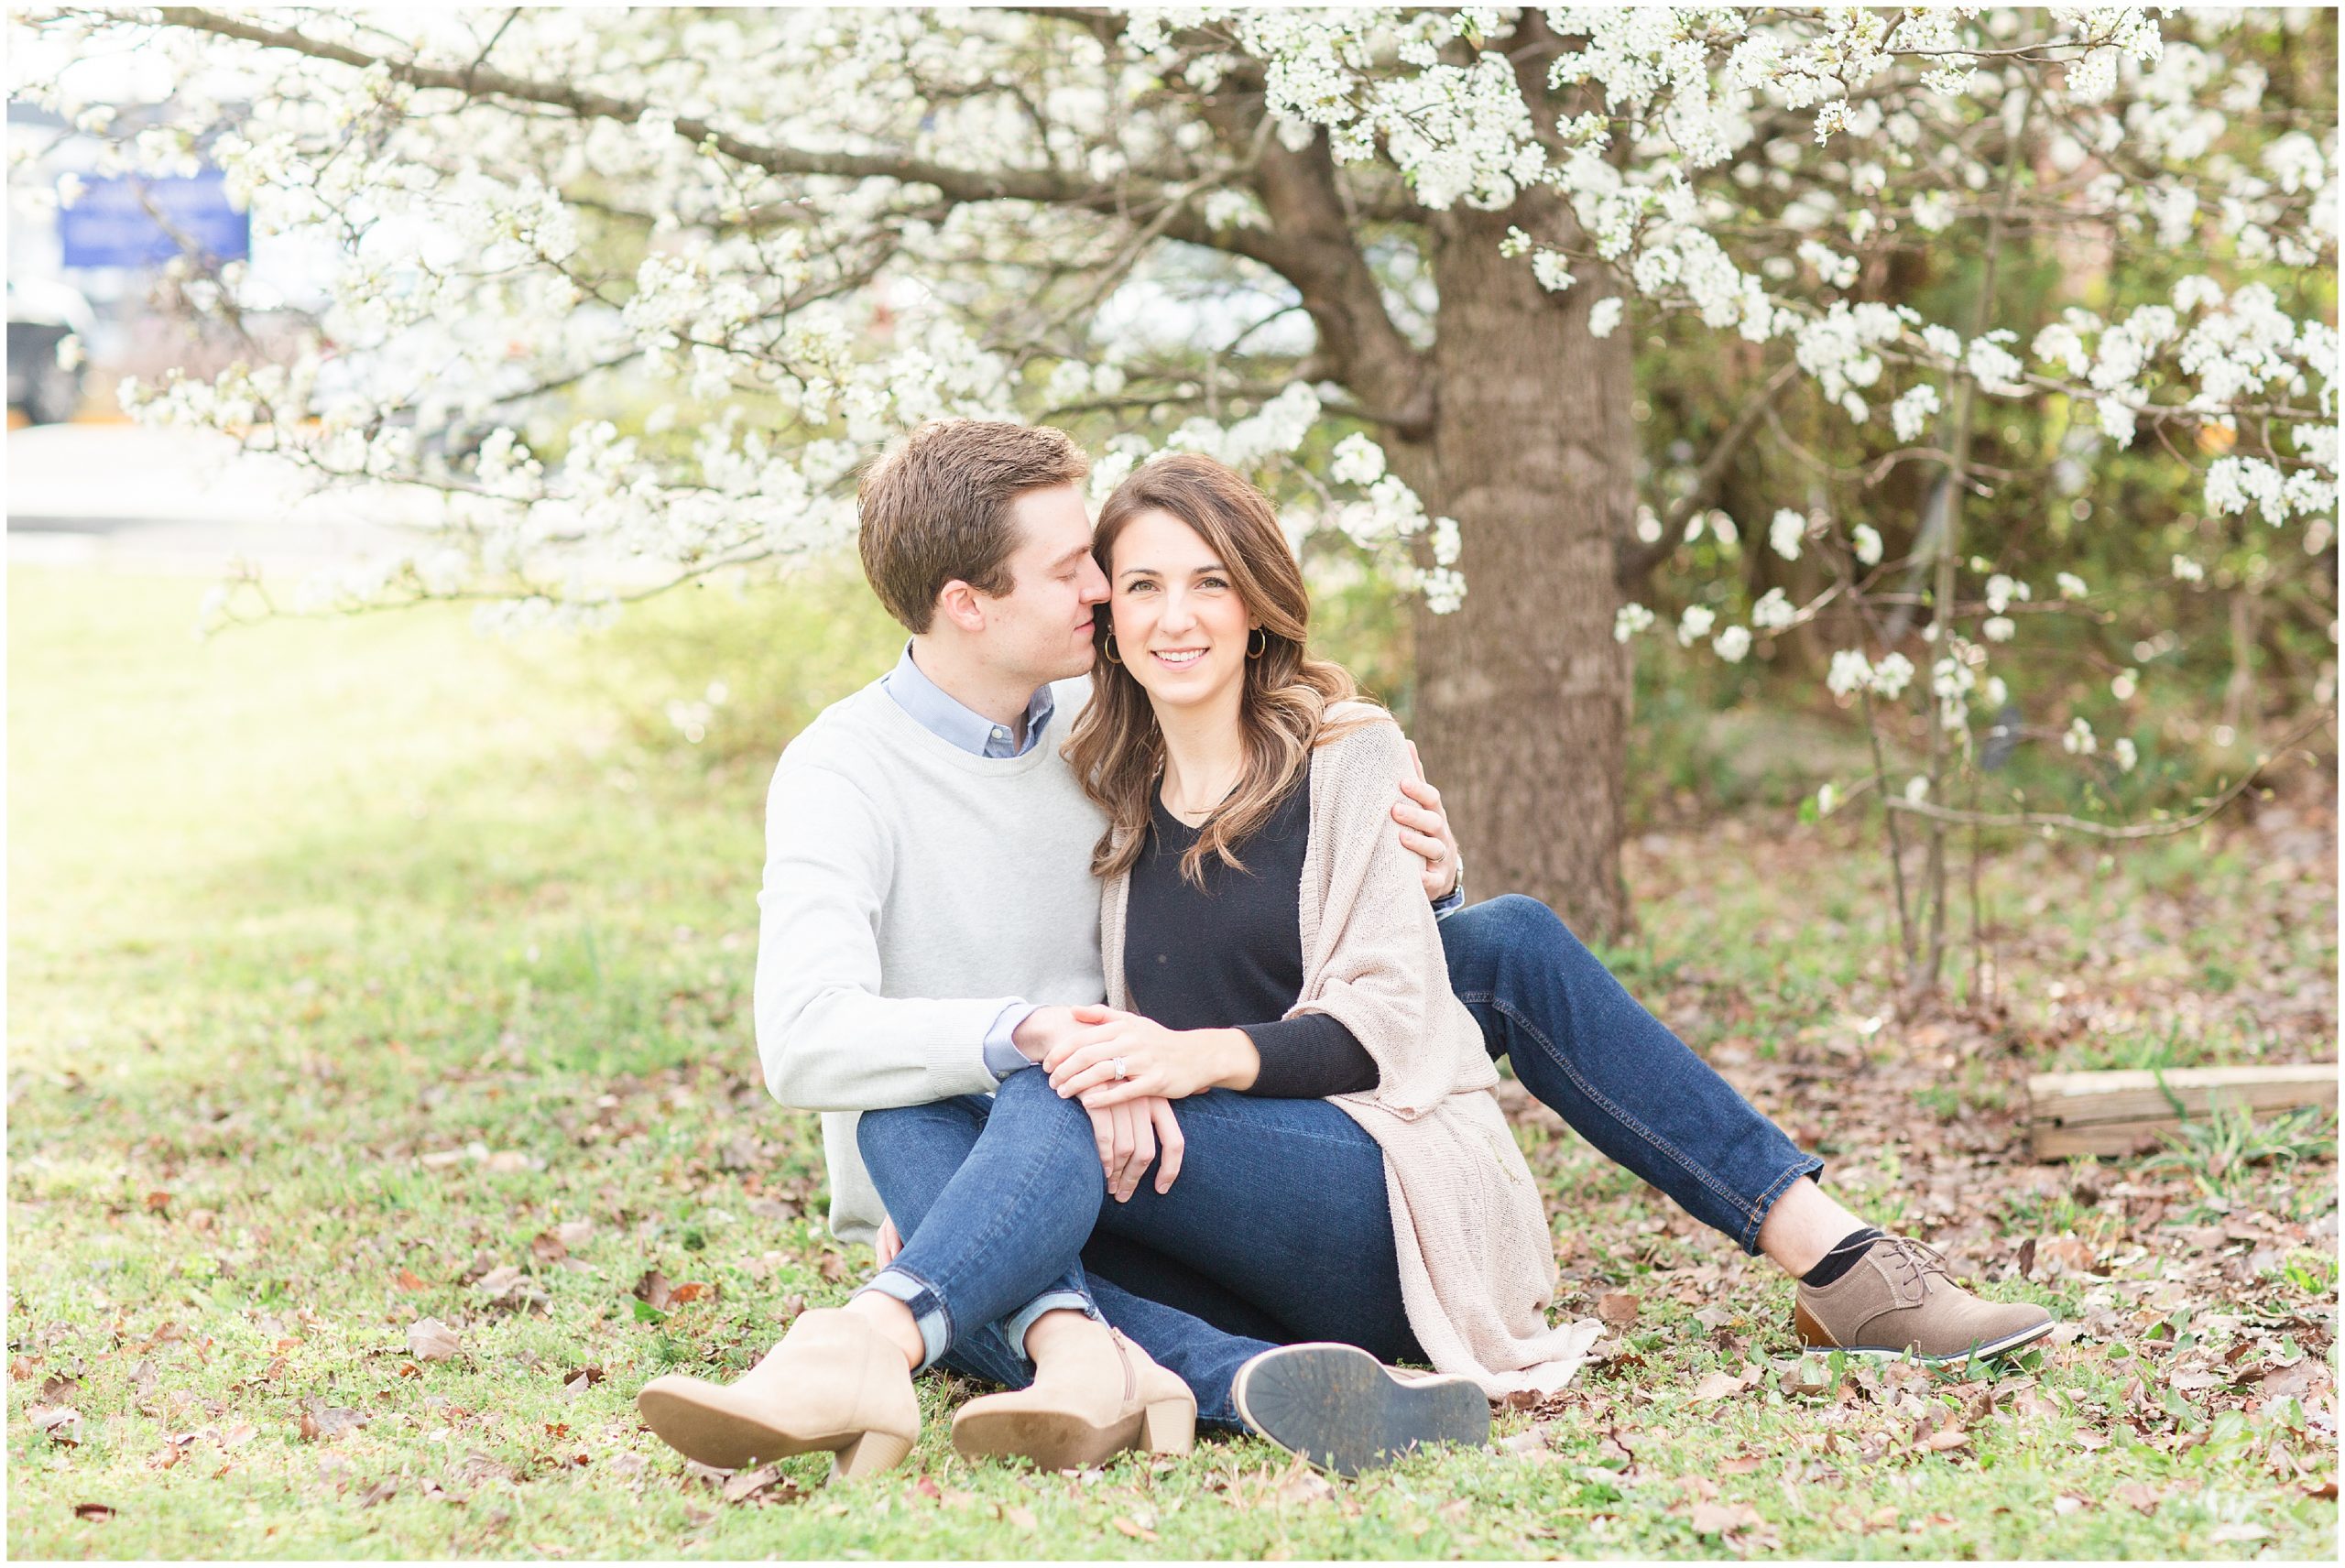 couple sits together under tree with white blooms